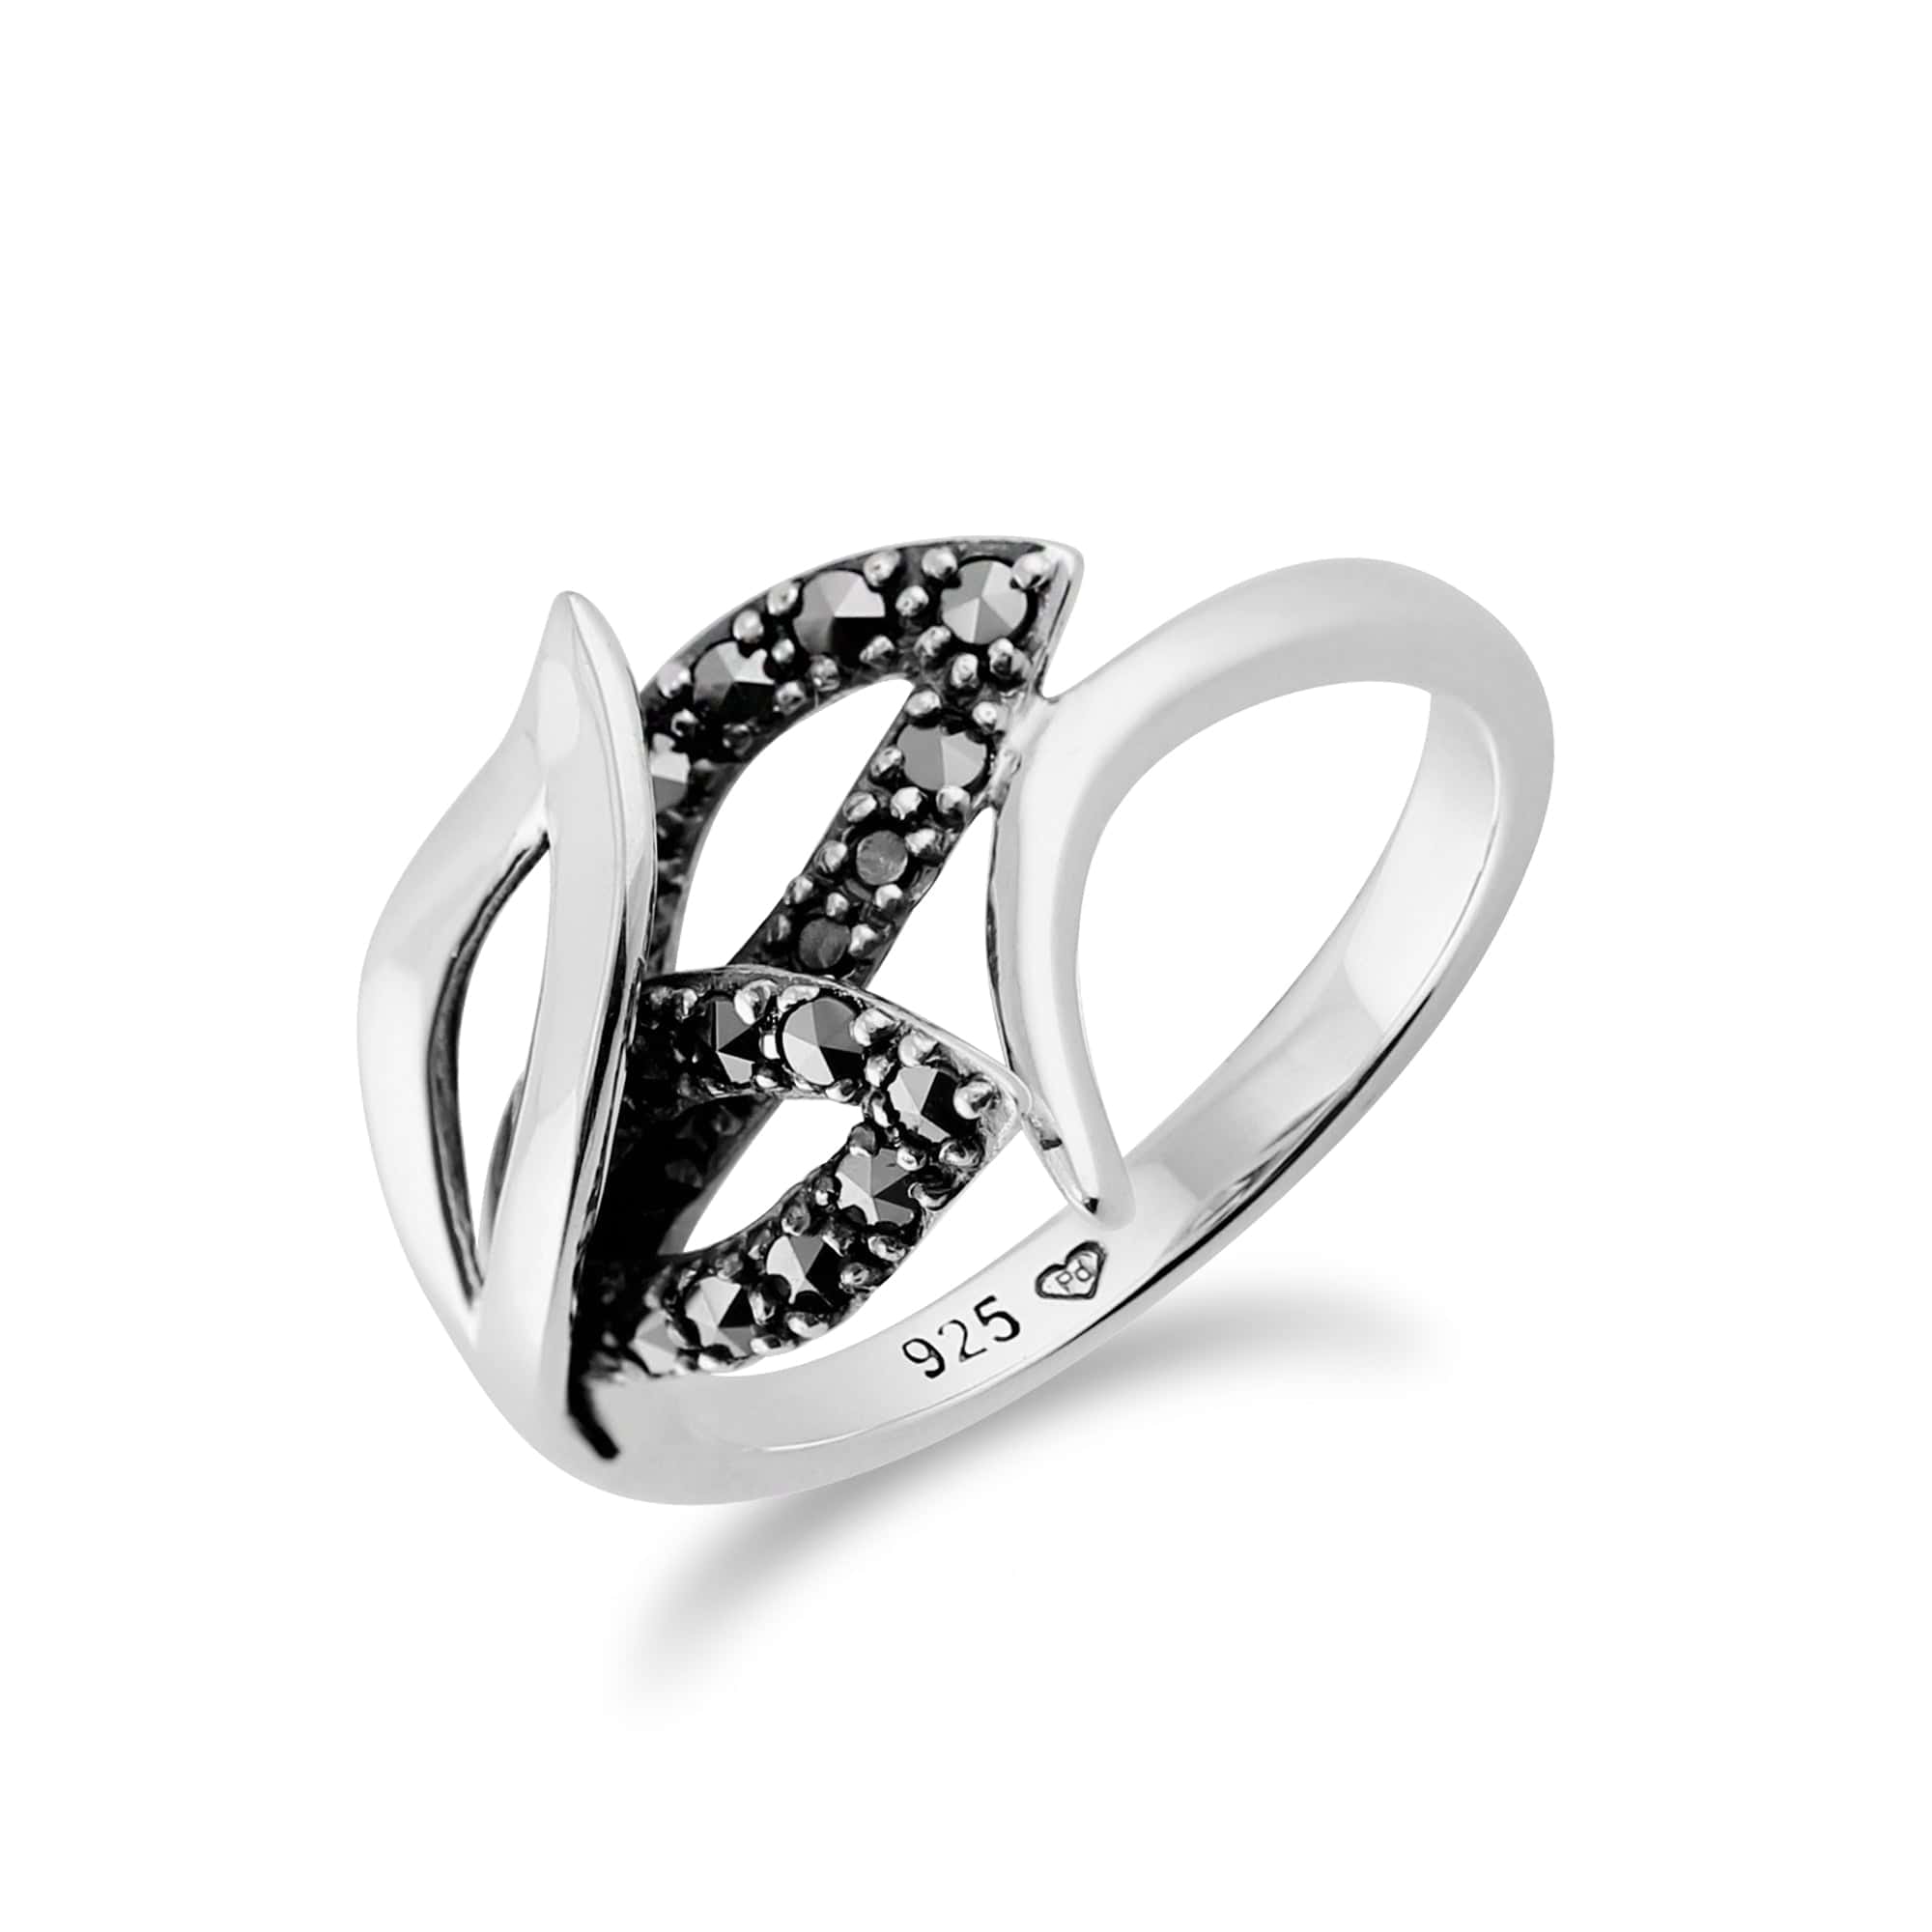 214R476301925 Art Nouveau Style Round Marcasite Leaf Wrap Ring in 925 Sterling Silver 2